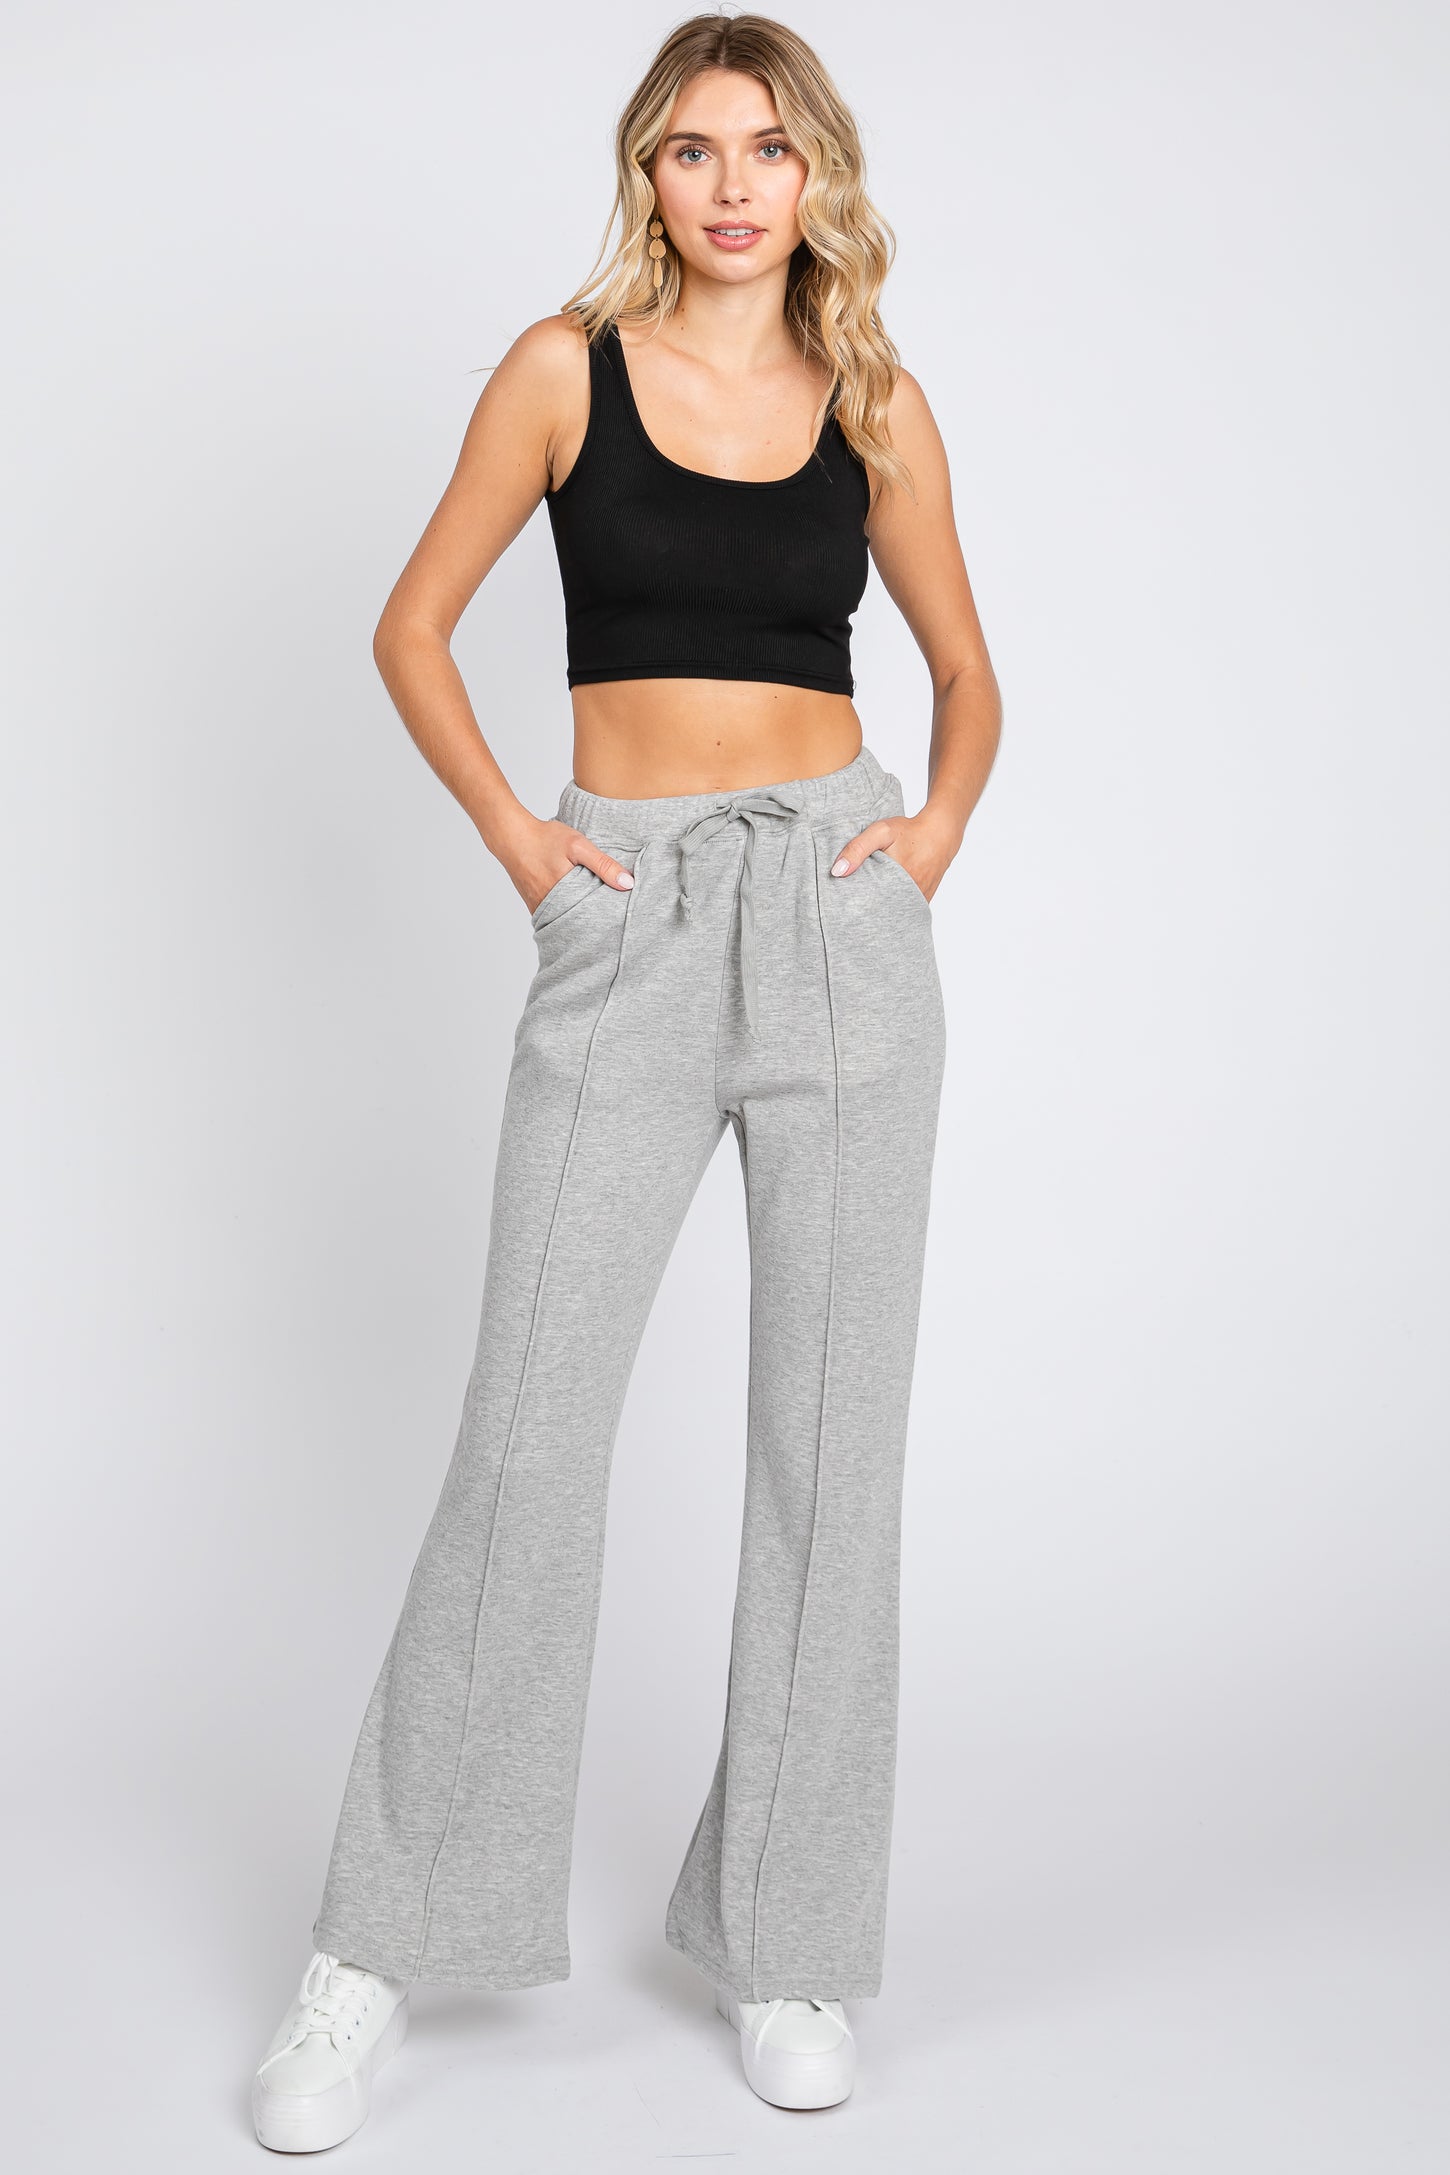 Heather Grey Faux Fur Lined Flare Lounge Pants– PinkBlush